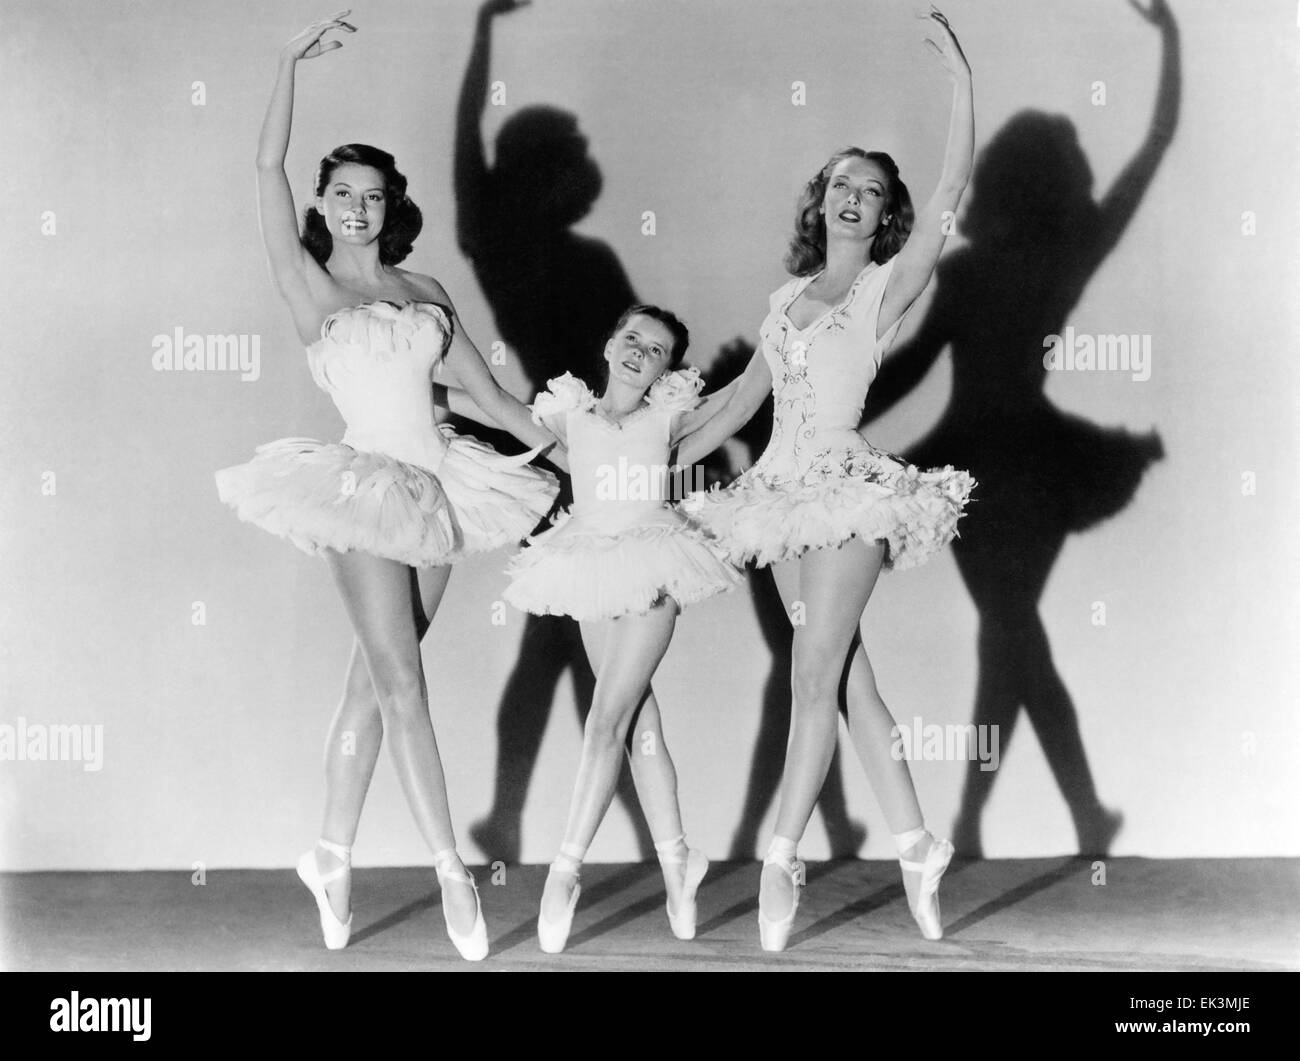 Cyd Charisse, Margaret O'Brien, Karin Booth, on-set of the Film 'The Unfinished Dance', 1947 Stock Photo